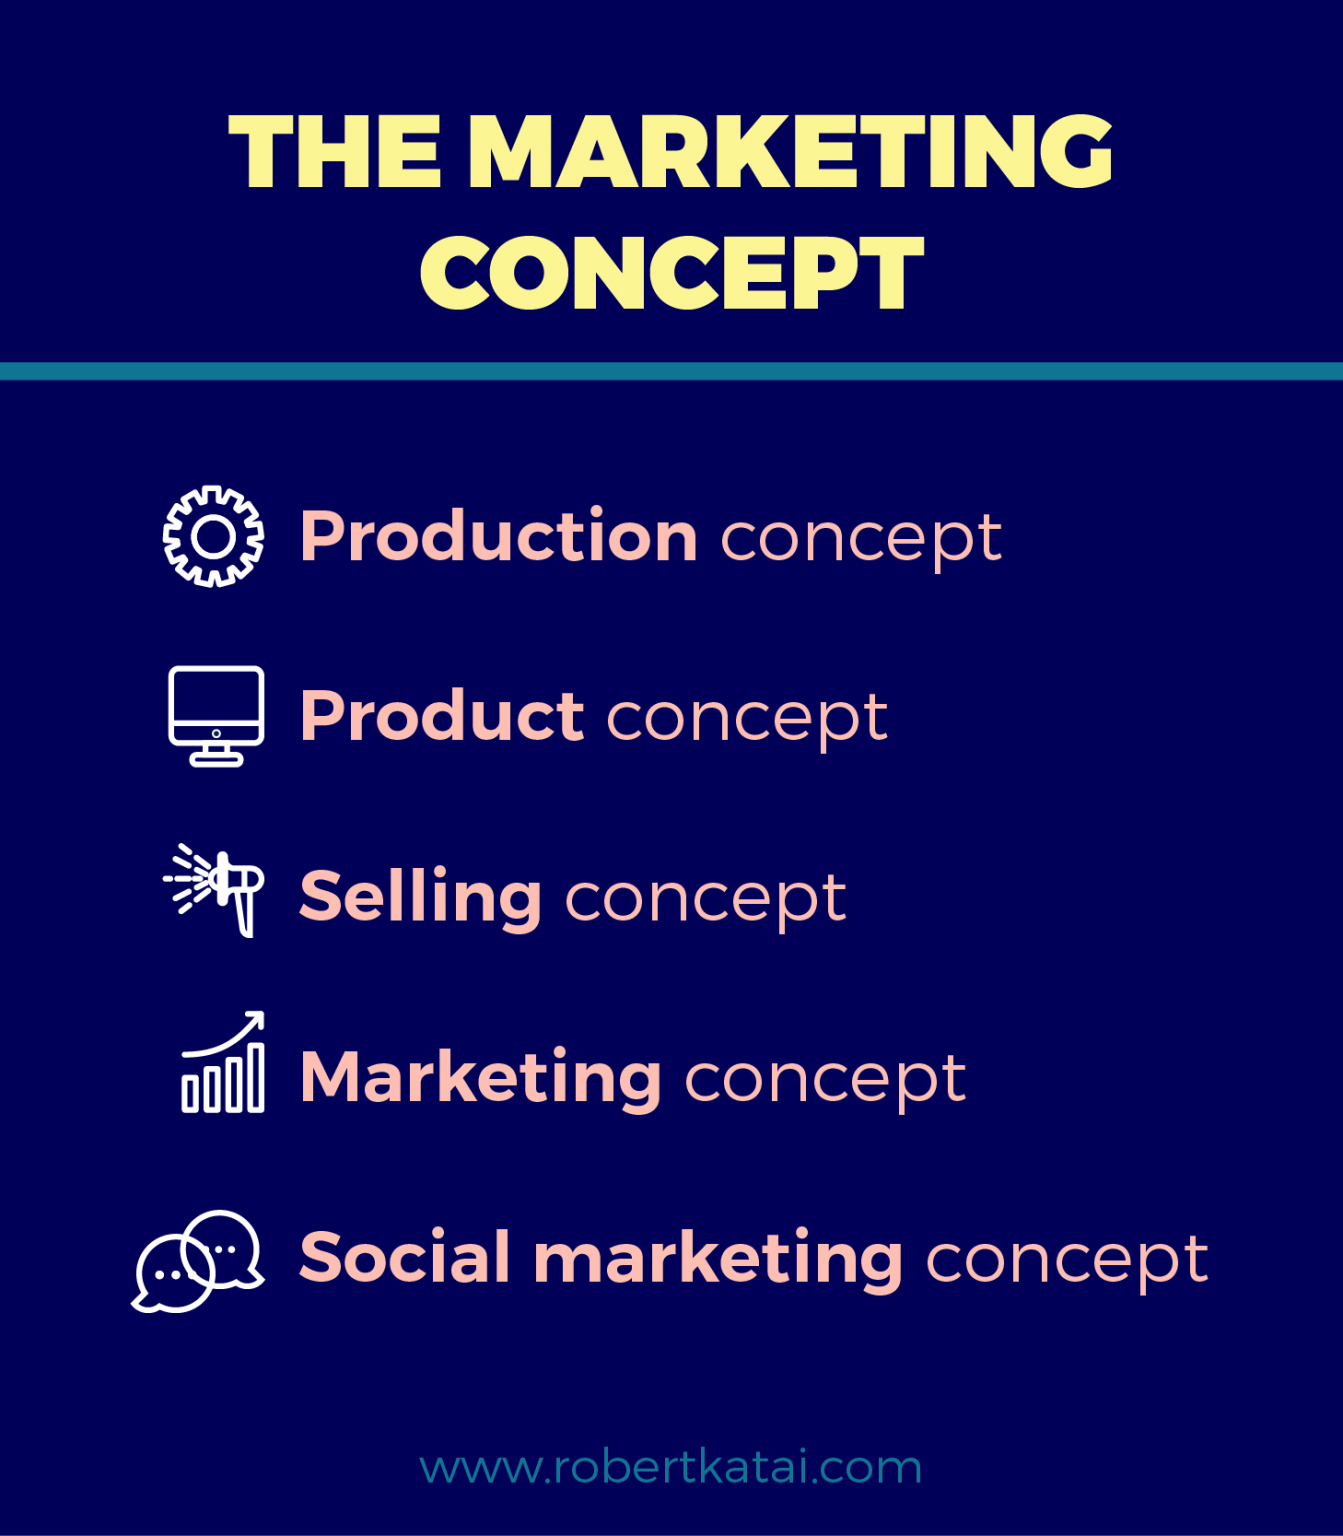 Marketing Concept Made Simple: A Step-by-Step Guide